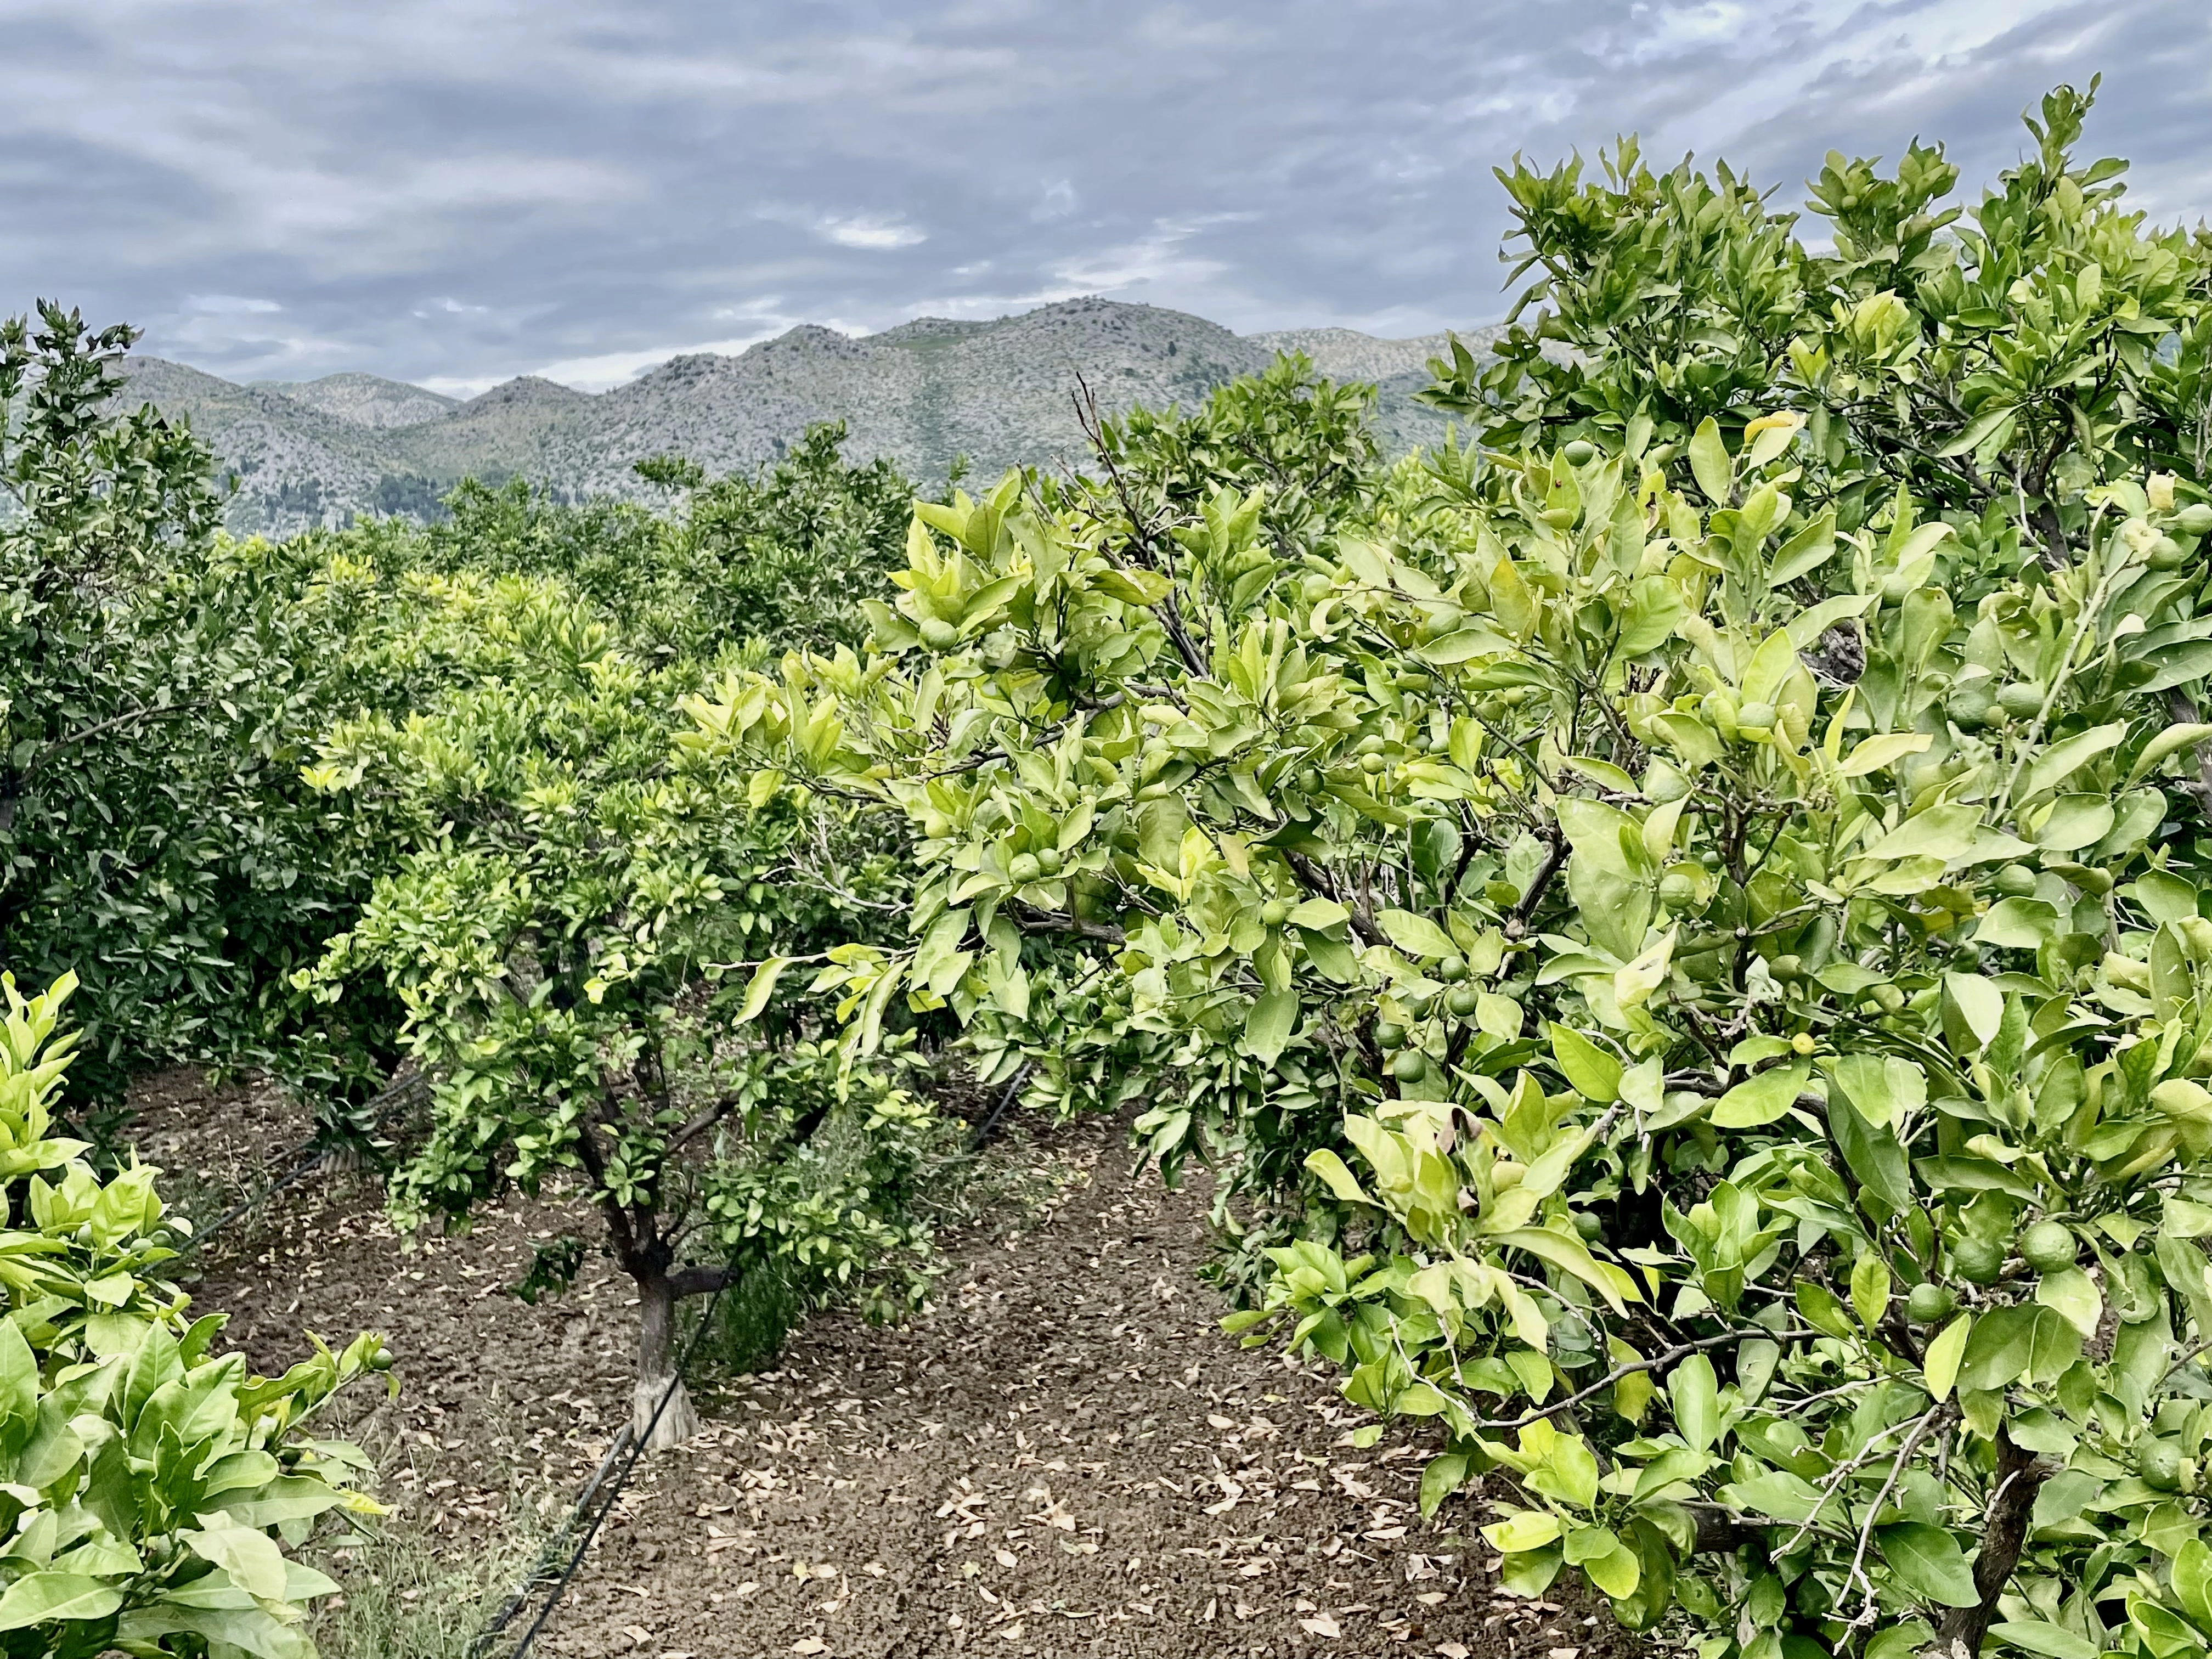 Orchard and mountains